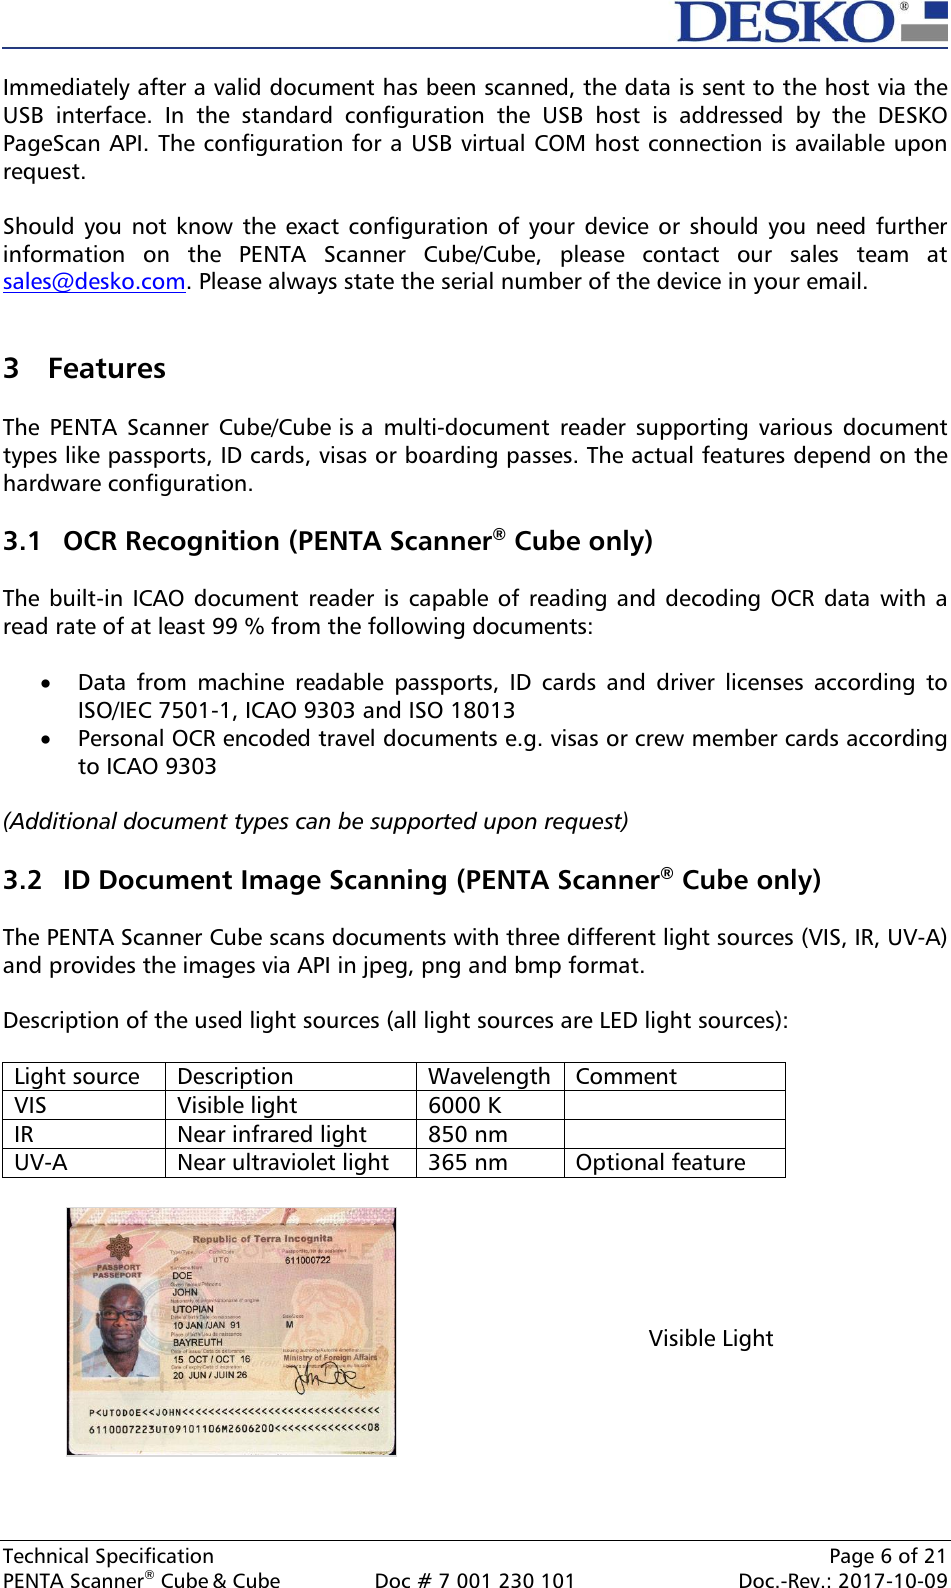  Technical Specification    Page 6 of 21 PENTA Scanner® Cube &amp; Cube  Doc # 7 001 230 101  Doc.-Rev.: 2017-10-09    Immediately after a valid document has been scanned, the data is sent to the host via the USB  interface.  In  the  standard  configuration  the  USB  host  is  addressed  by  the  DESKO PageScan API. The configuration for a USB virtual COM host connection is available upon request.  Should you  not know  the exact configuration of  your device  or should you  need further information  on  the  PENTA  Scanner  Cube/Cube,  please  contact  our  sales  team  at sales@desko.com. Please always state the serial number of the device in your email.   3 Features  The  PENTA  Scanner  Cube/Cube is a  multi-document  reader  supporting  various  document types like passports, ID cards, visas or boarding passes. The actual features depend on the hardware configuration.  3.1 OCR Recognition (PENTA Scanner® Cube only)  The built-in  ICAO document reader  is capable of  reading and  decoding OCR  data  with a read rate of at least 99 % from the following documents:   Data  from  machine  readable  passports,  ID  cards  and  driver  licenses  according  to ISO/IEC 7501-1, ICAO 9303 and ISO 18013  Personal OCR encoded travel documents e.g. visas or crew member cards according to ICAO 9303  (Additional document types can be supported upon request)  3.2 ID Document Image Scanning (PENTA Scanner® Cube only)  The PENTA Scanner Cube scans documents with three different light sources (VIS, IR, UV-A) and provides the images via API in jpeg, png and bmp format.  Description of the used light sources (all light sources are LED light sources):  Light source Description Wavelength Comment VIS Visible light 6000 K  IR Near infrared light 850 nm  UV-A Near ultraviolet light 365 nm Optional feature   Visible Light 